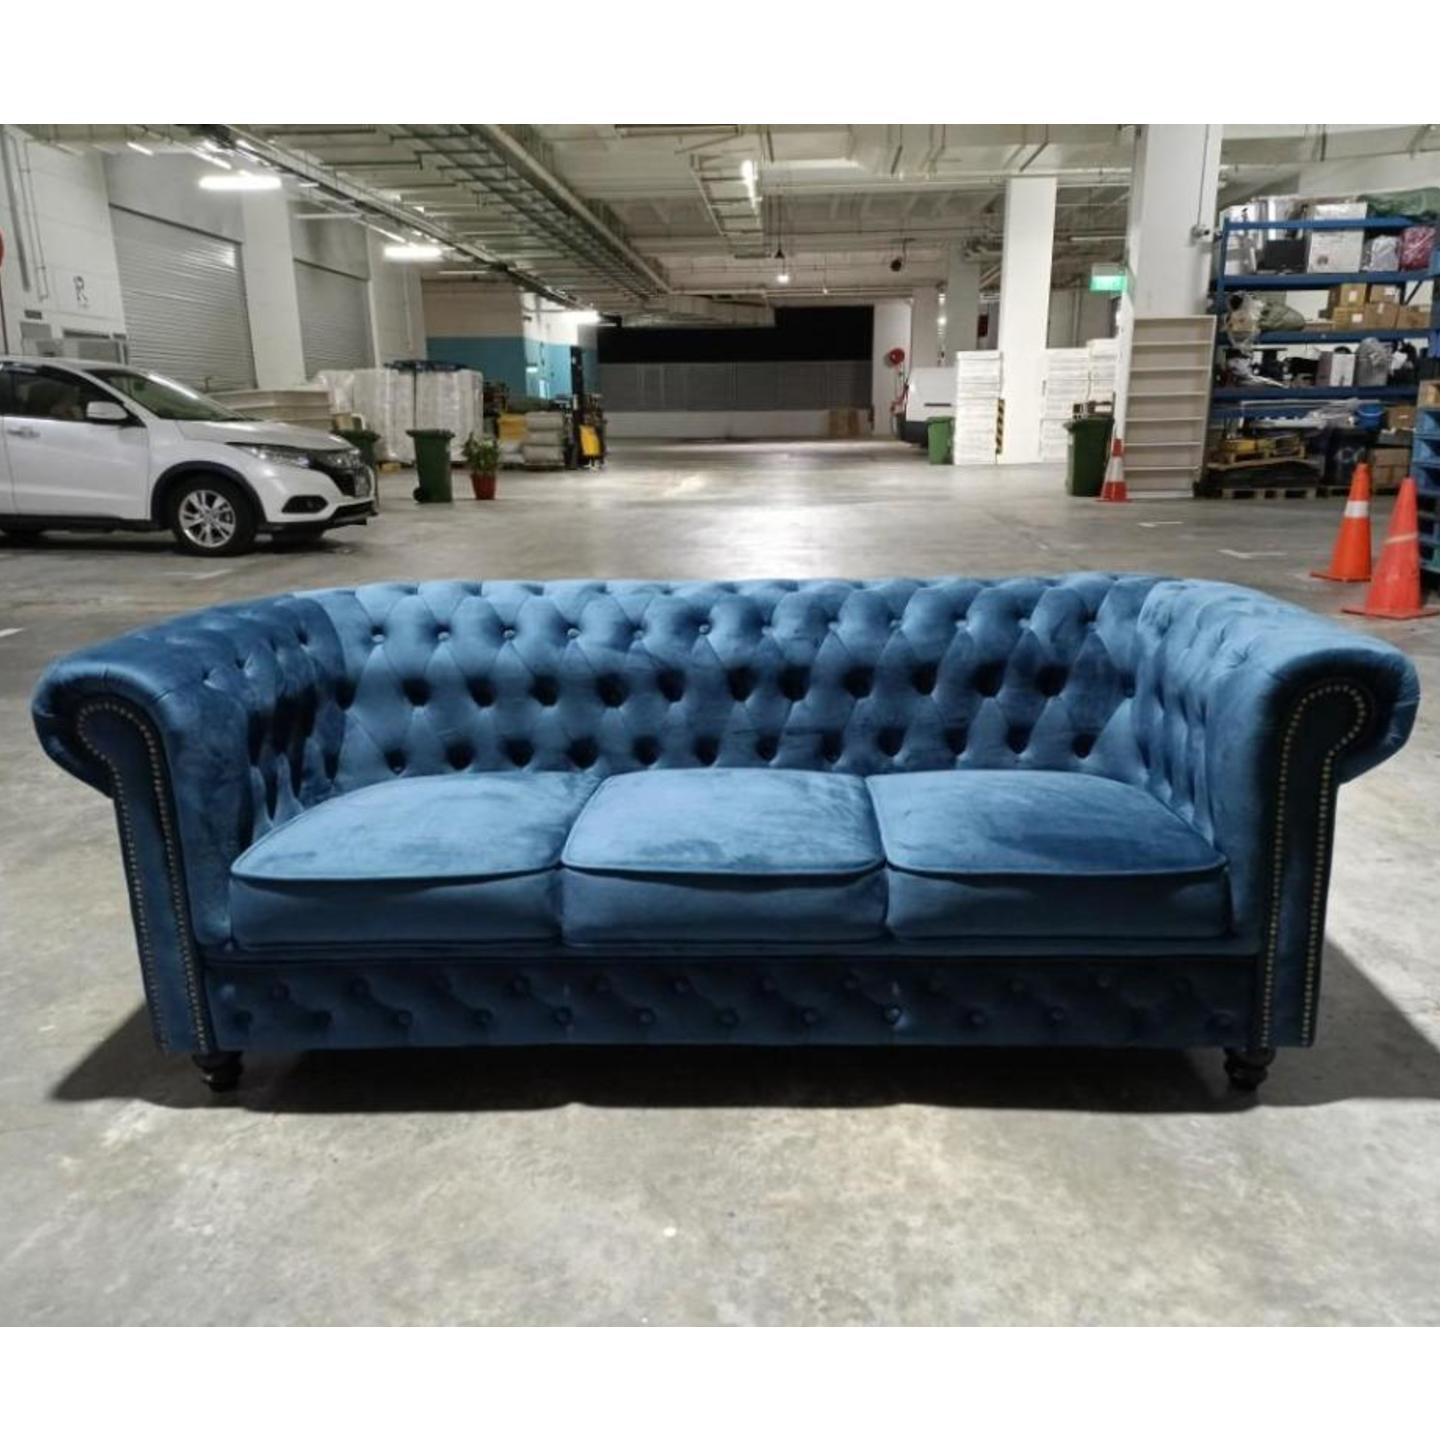 PRE ORDER SALVADORE X 3 Seater Chesterfield Sofa in MIDNIGHT BLUE VELVET - Estimated Delivery by End August 2022